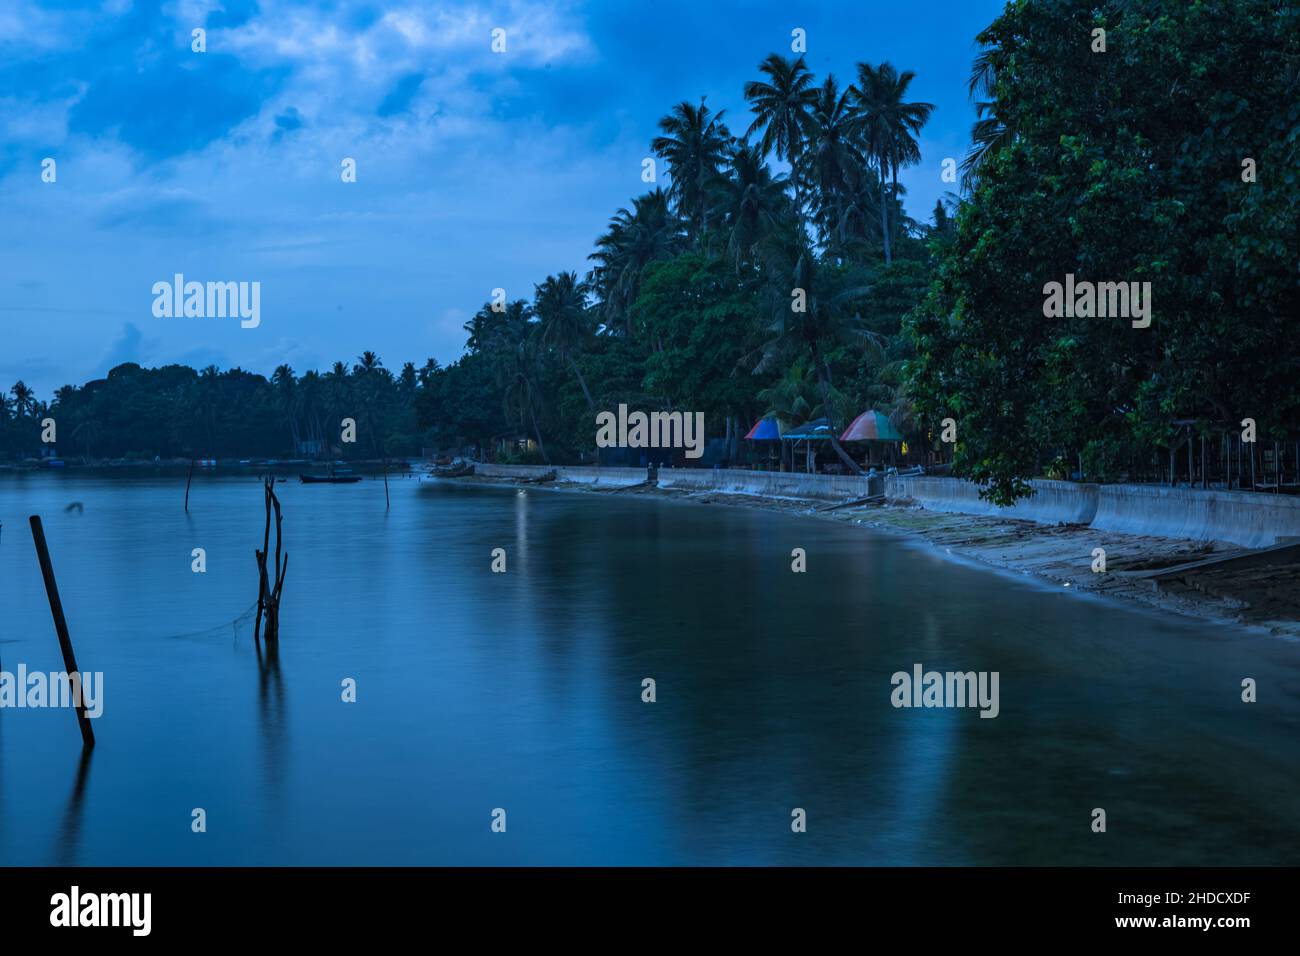 Mesmerizing scene of the magic blue water in the Islands in Batam, Indonesia in the evening Stock Photo